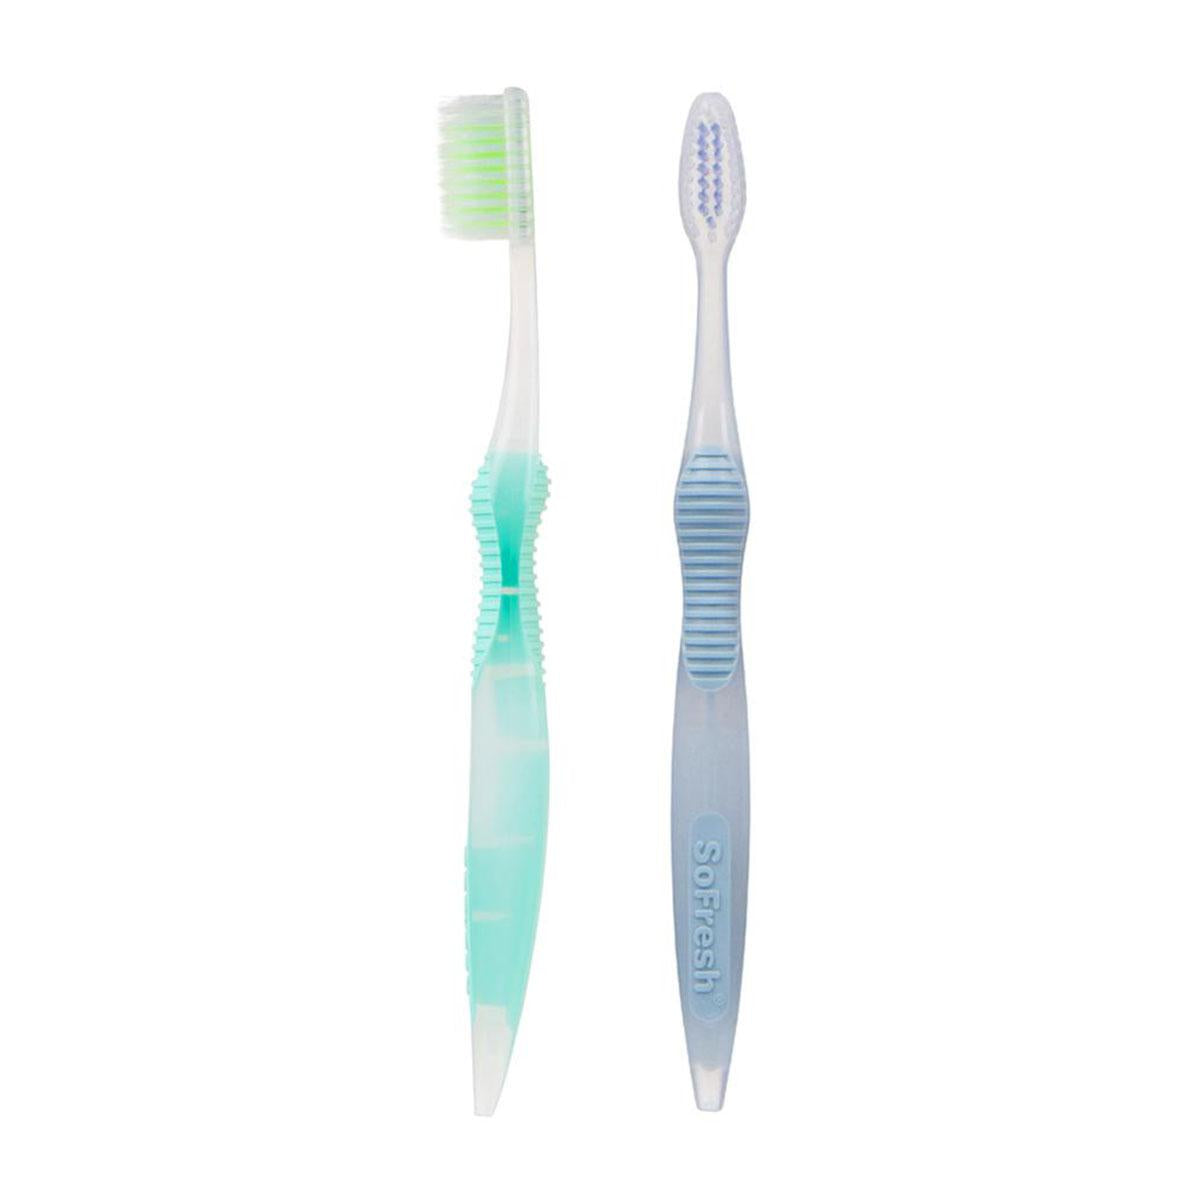 Primary image of 2pk Flossing Toothbrush